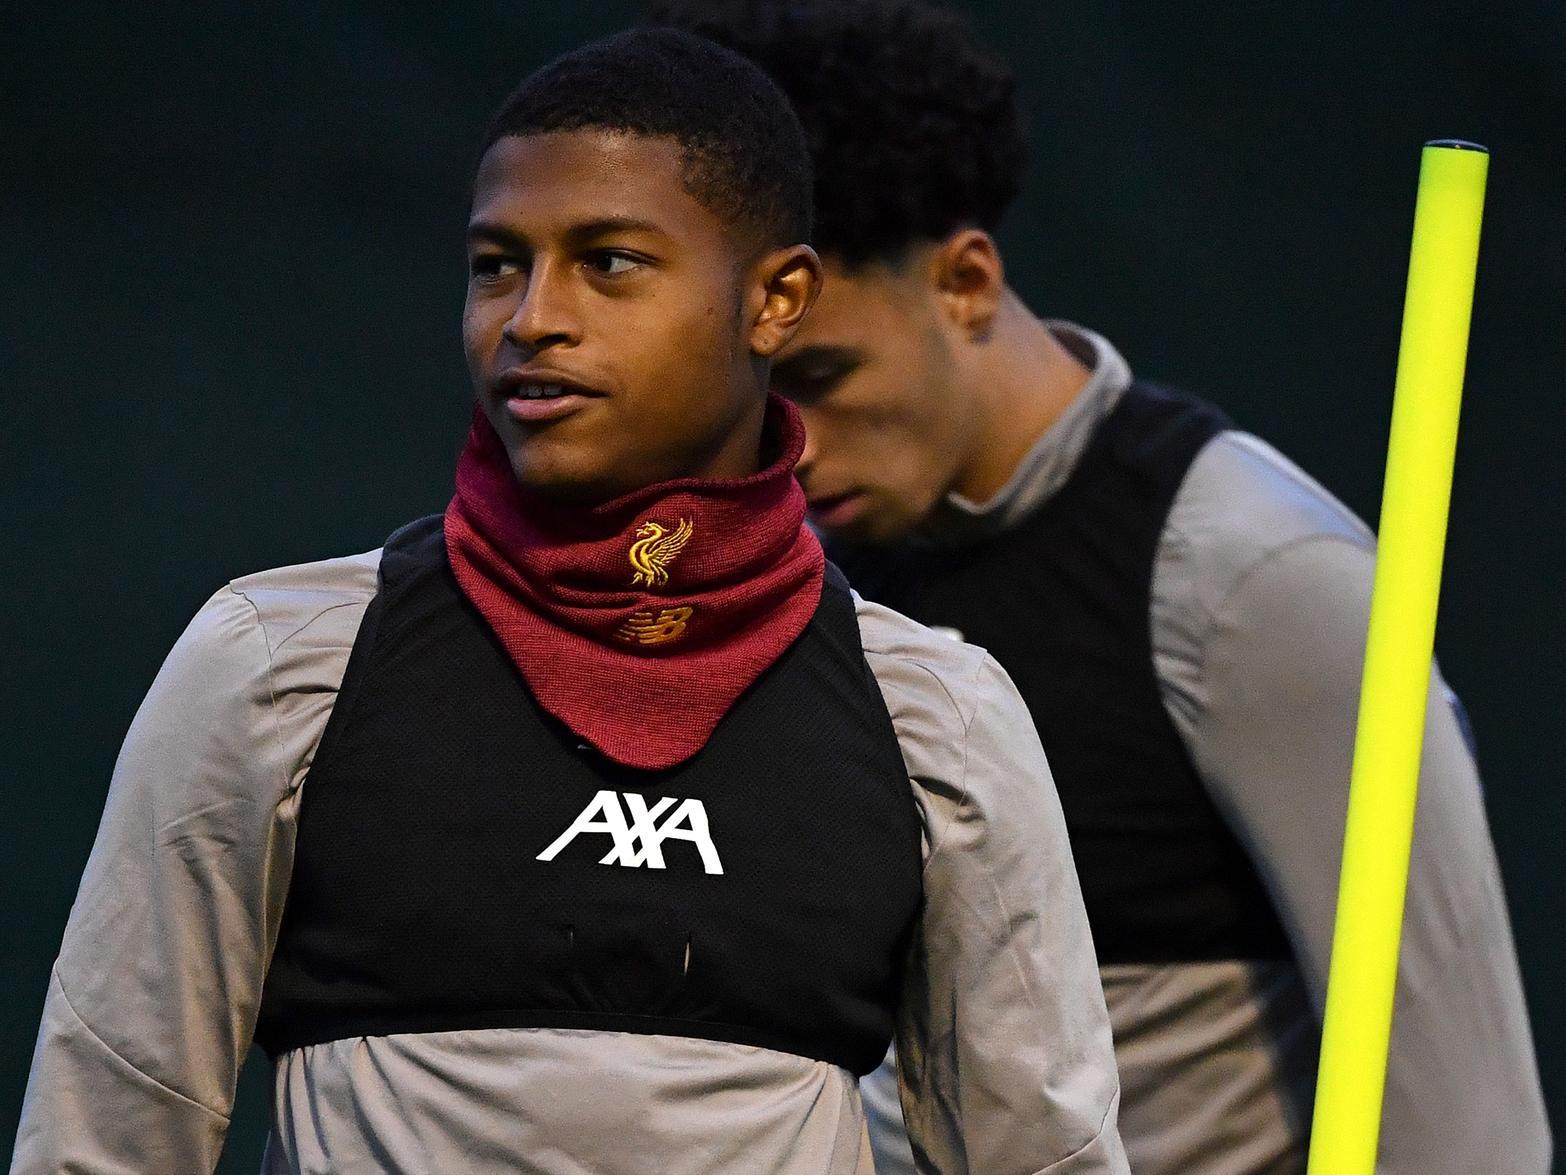 Sheffield Wednesday are said to have joined the likes of Crystal Palace and Leeds in the race to loan Liverpool's starlet striker Rhian Brewster, but Swansea City remain favourites to clinch the deal. (Wales Online)